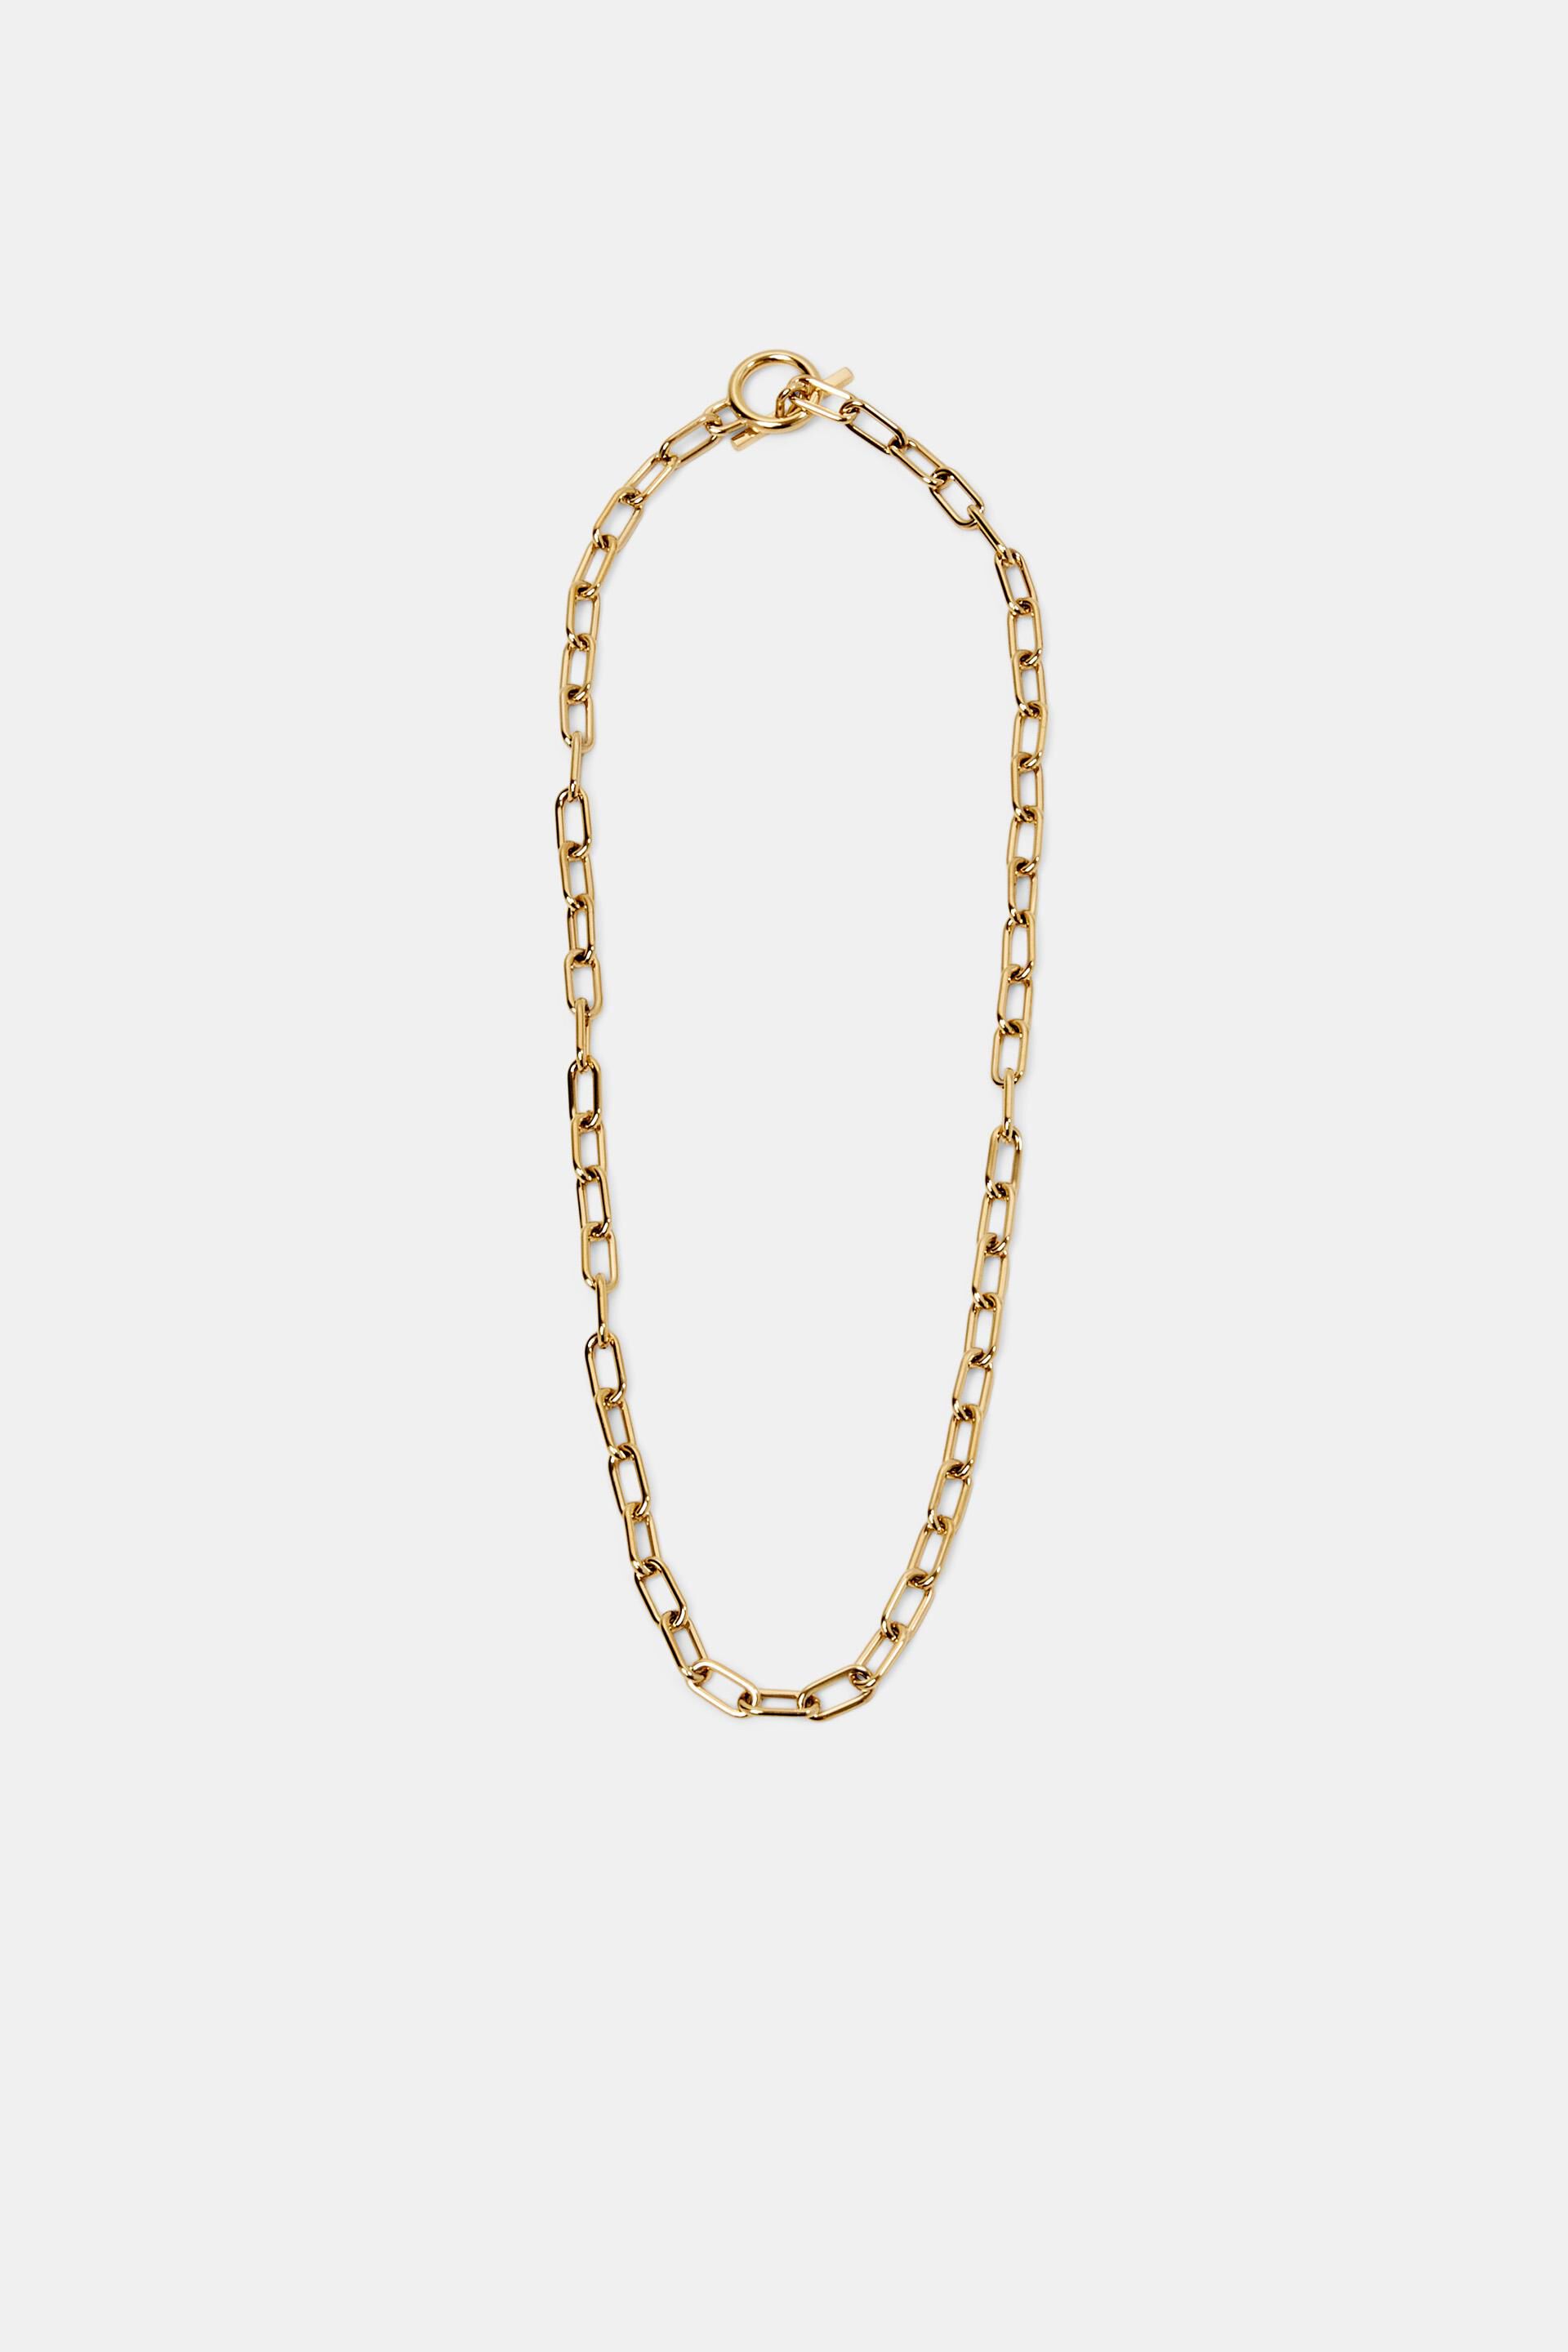 Esprit necklace, stainless steel Chain